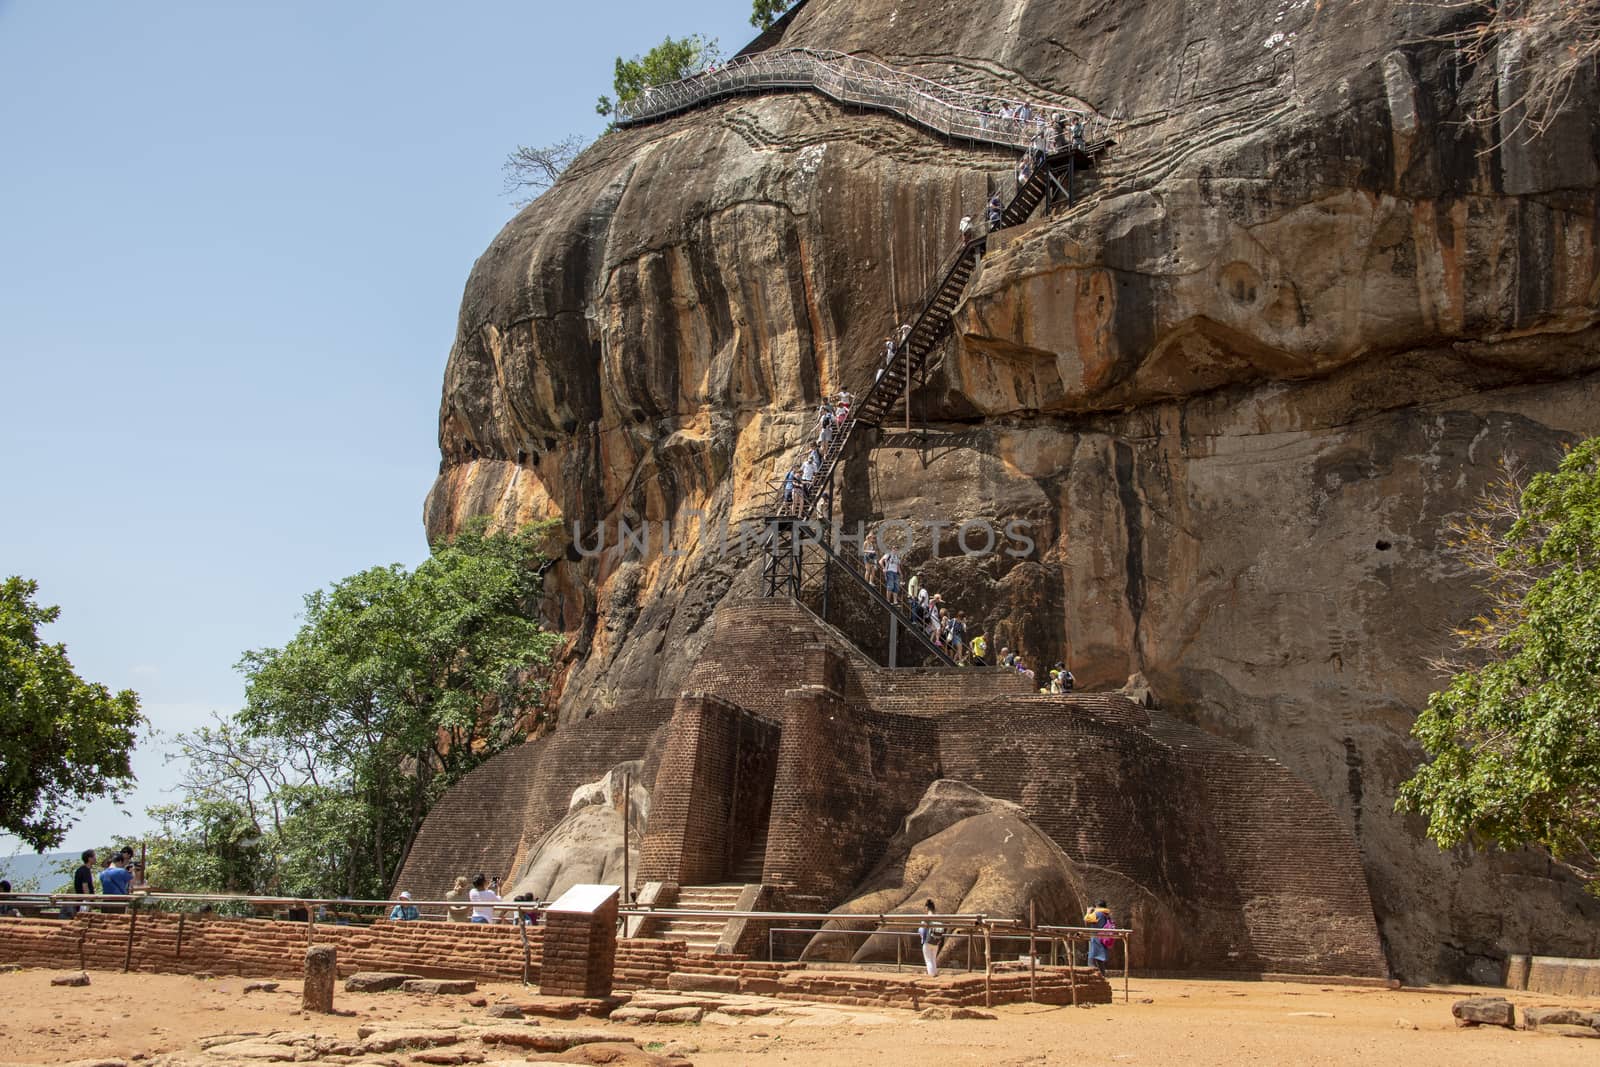 Sri lanka, Sept 2015: Tourists climb to the top of the rock above the ruins of the ancient lions feet at the palace entrance